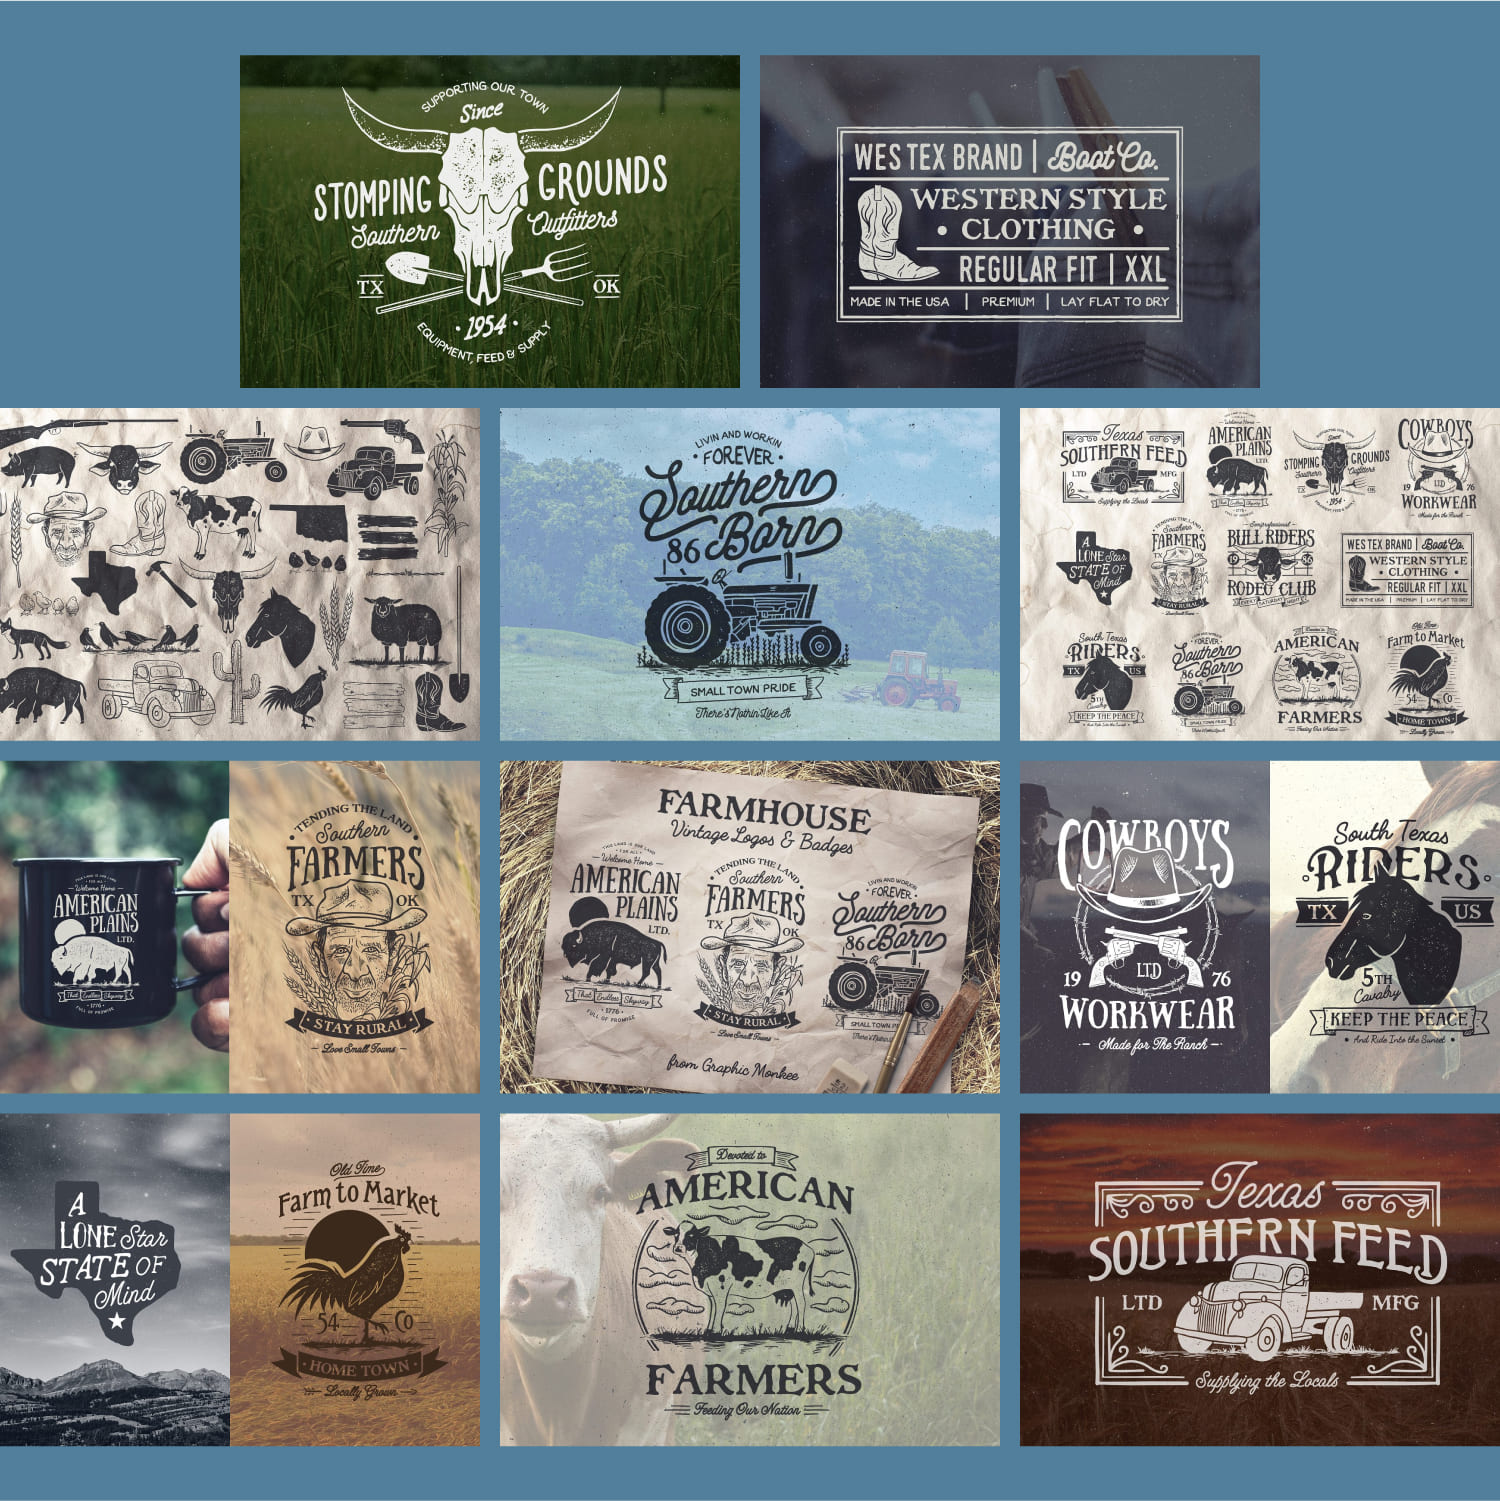 Farmhouse Vintage Badges and Logos cover.